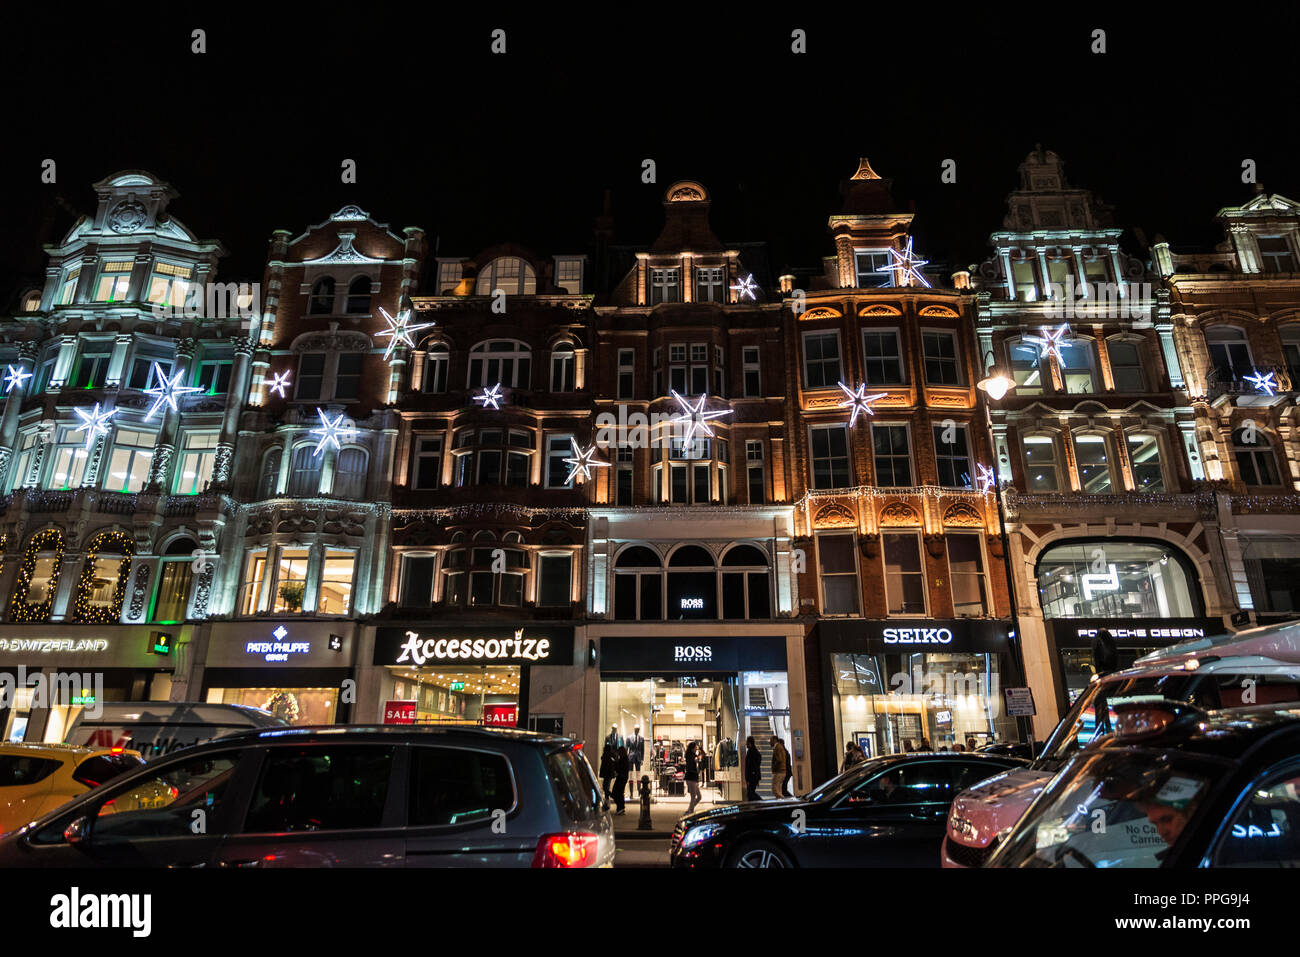 London, United Kingdom - January 3, 2018: Street of the luxurious district of Knightsbridge at night with Christmas decoration and people around in Lo Stock Photo